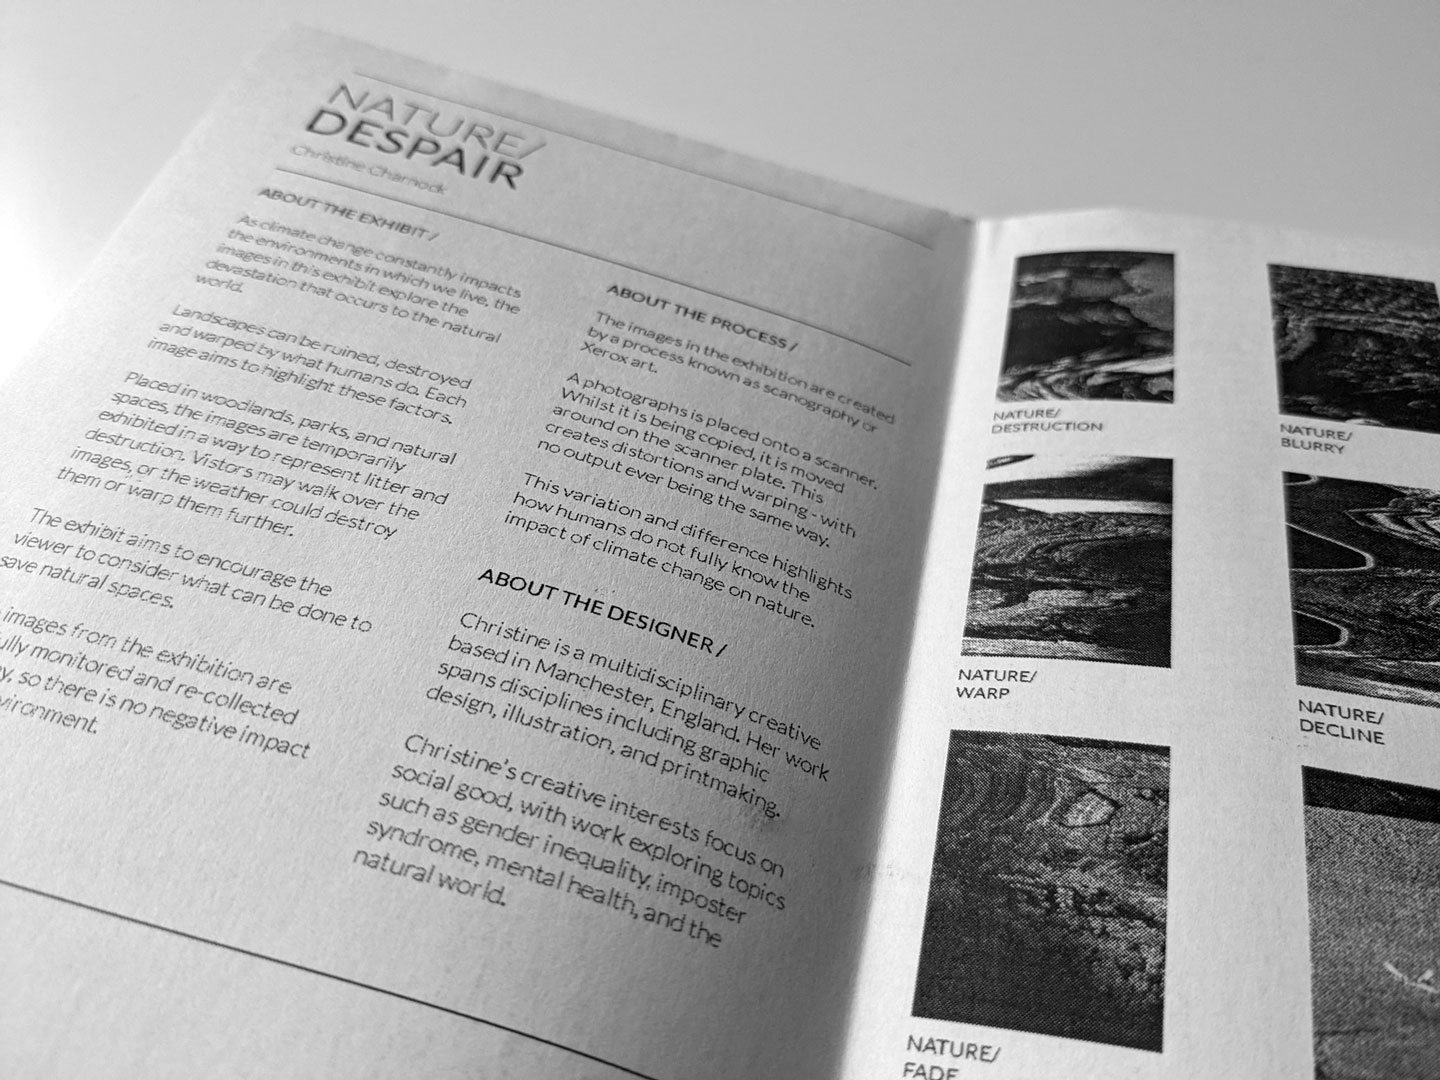 A zoomed-in photograph shows the interior of the exhibition catalogue. The page on the left provides an overview of the artist's exploration of the theme of despair in nature. This is written in black sans serif text on a white background. The page on the left highlights the artworks presented in the exhibition, with thumbnails of each piece and its title. 